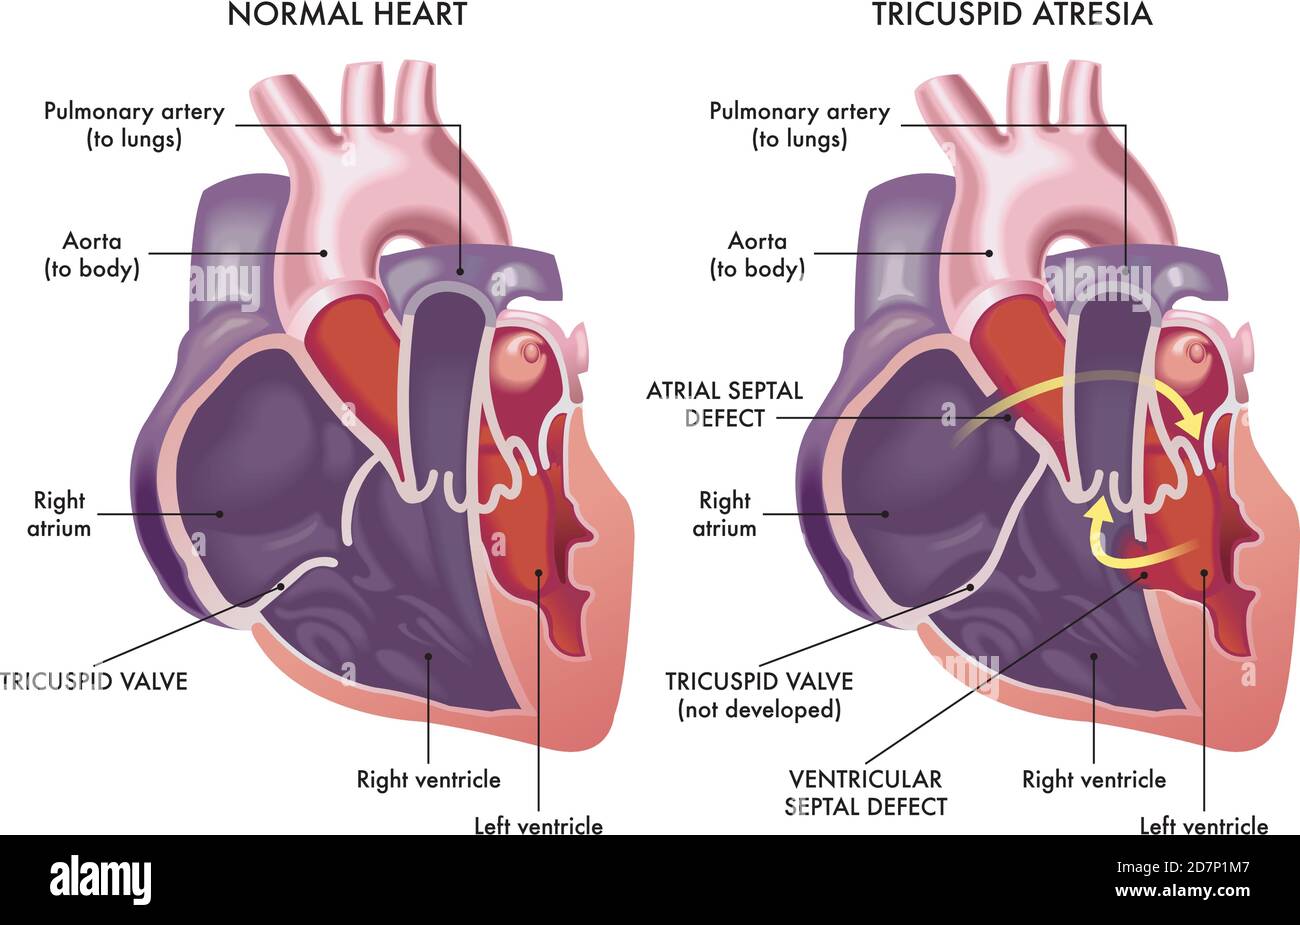 Medical illustration that compare a normal heart with a heart affected by cardiac defect called Tricuspid Atresia, with annotations. Stock Vector